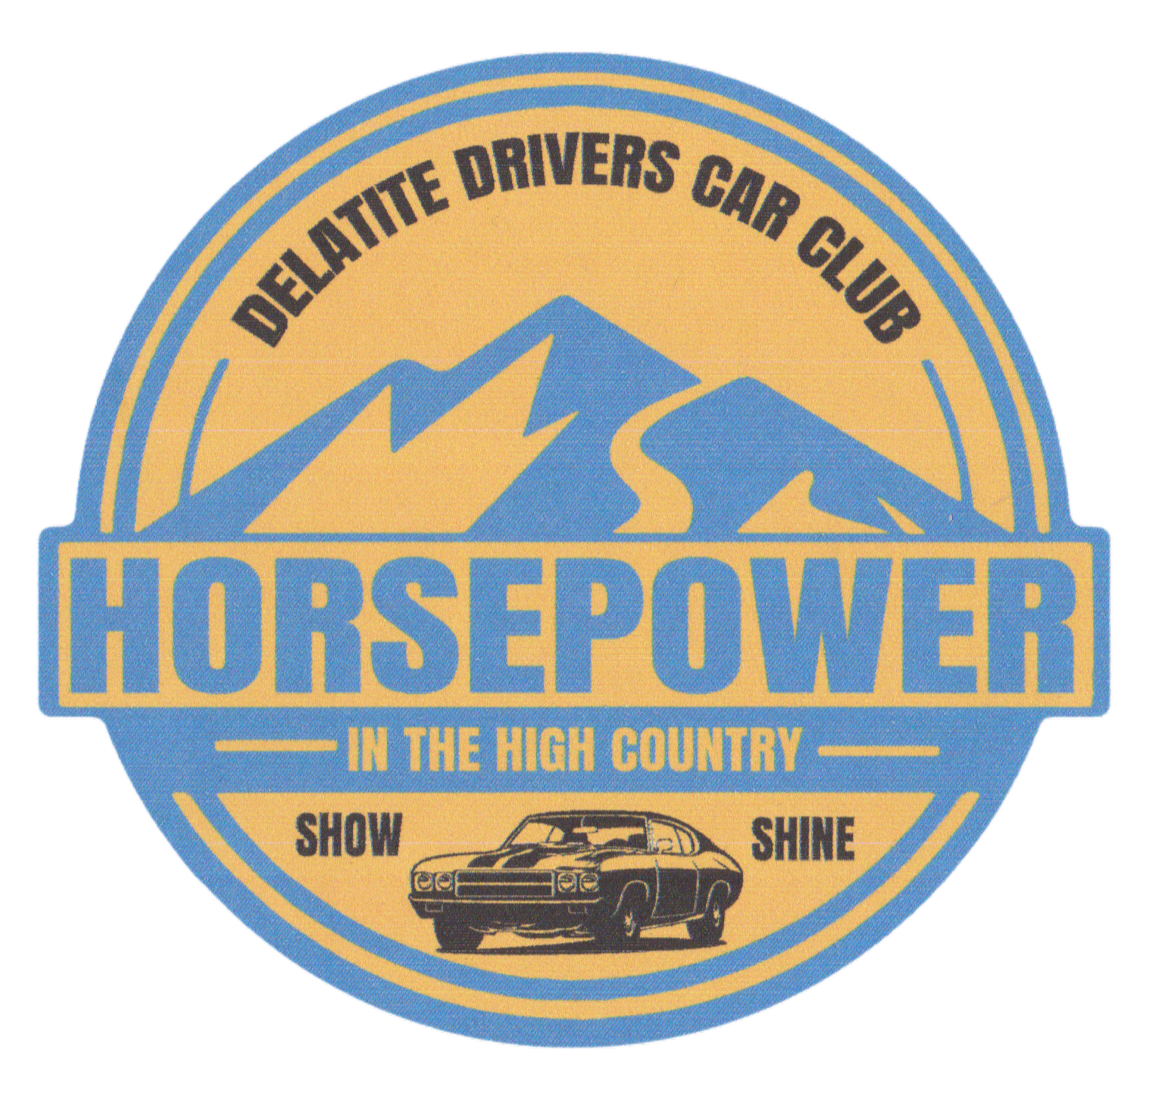 Show and Shine Horsepower in the High Country